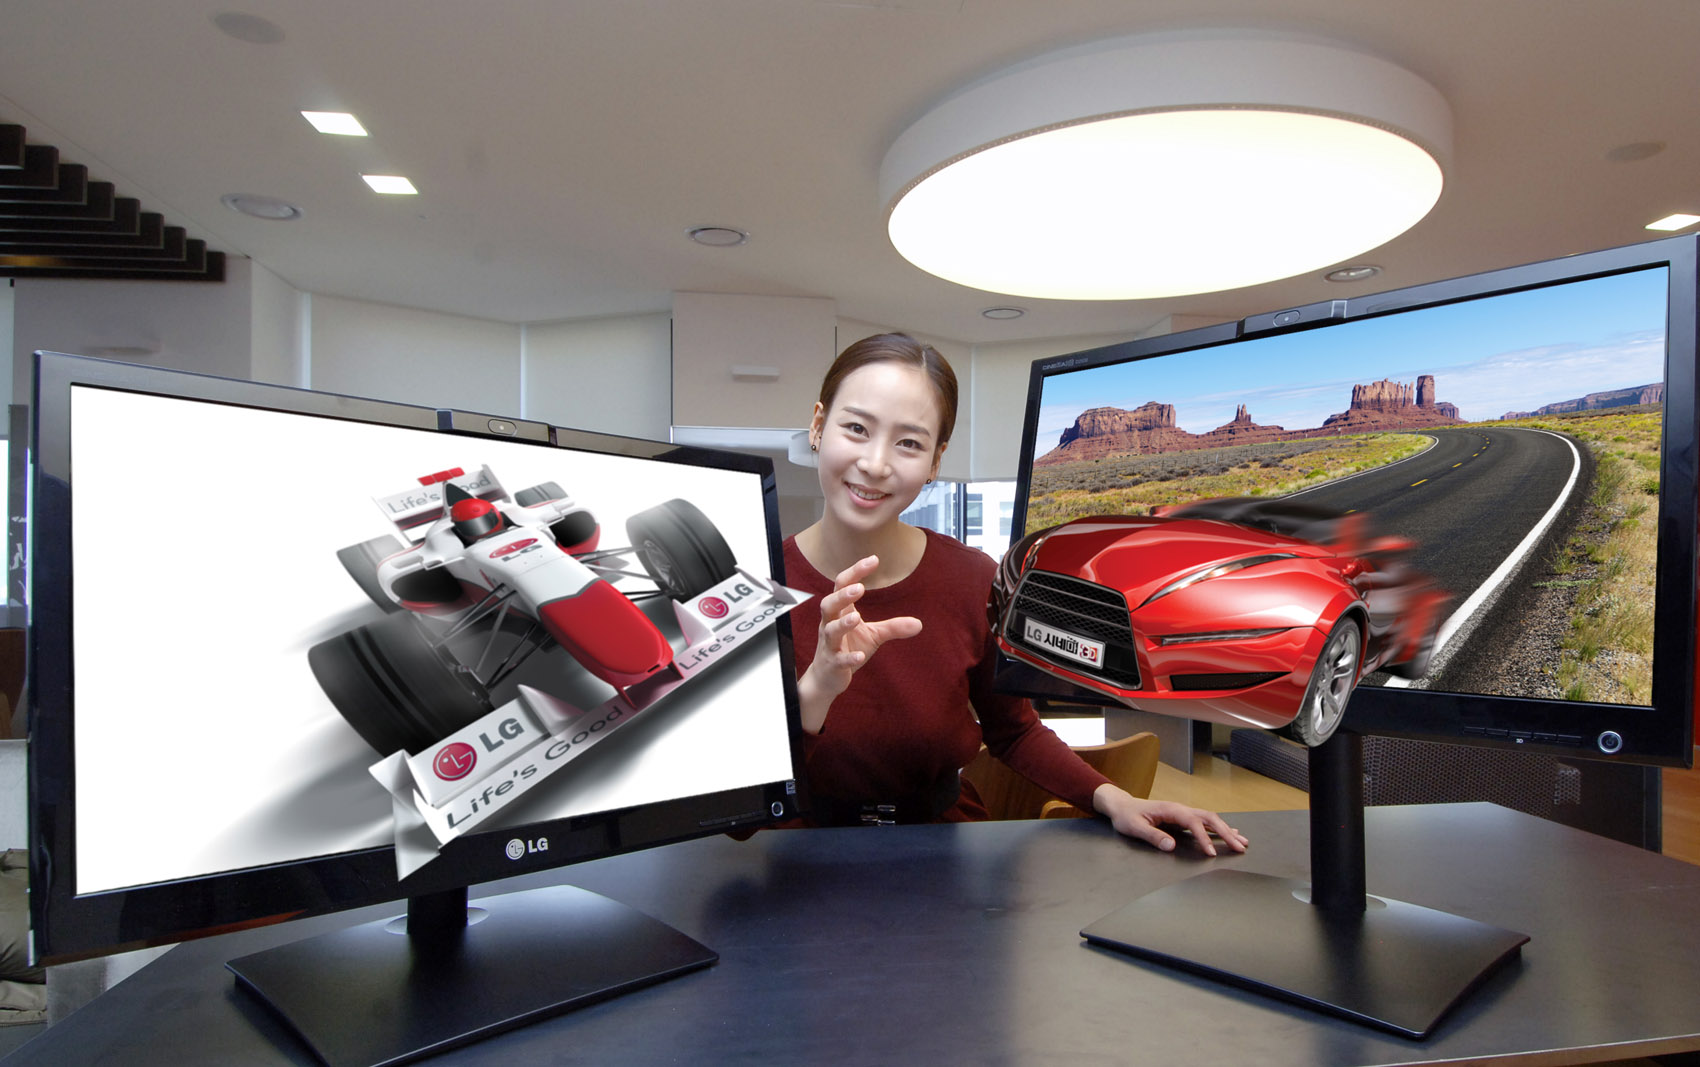 A model reaches out to grab 3D objects protruding out of LG’s 25-inch Glasses-Free 3D monitors